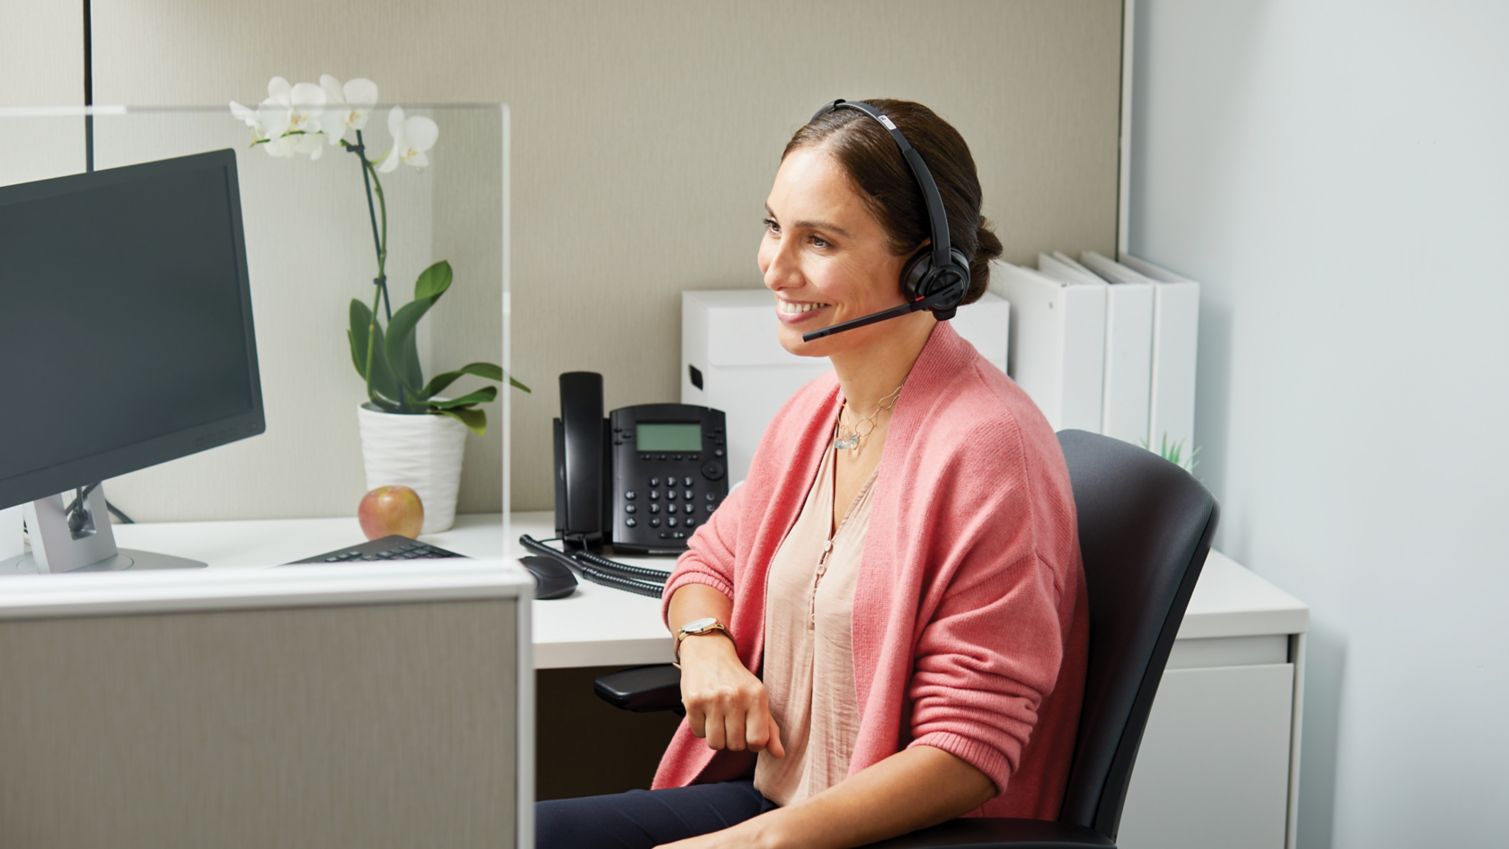 A woman wearing a headset answers a phone call while sitting a computer.